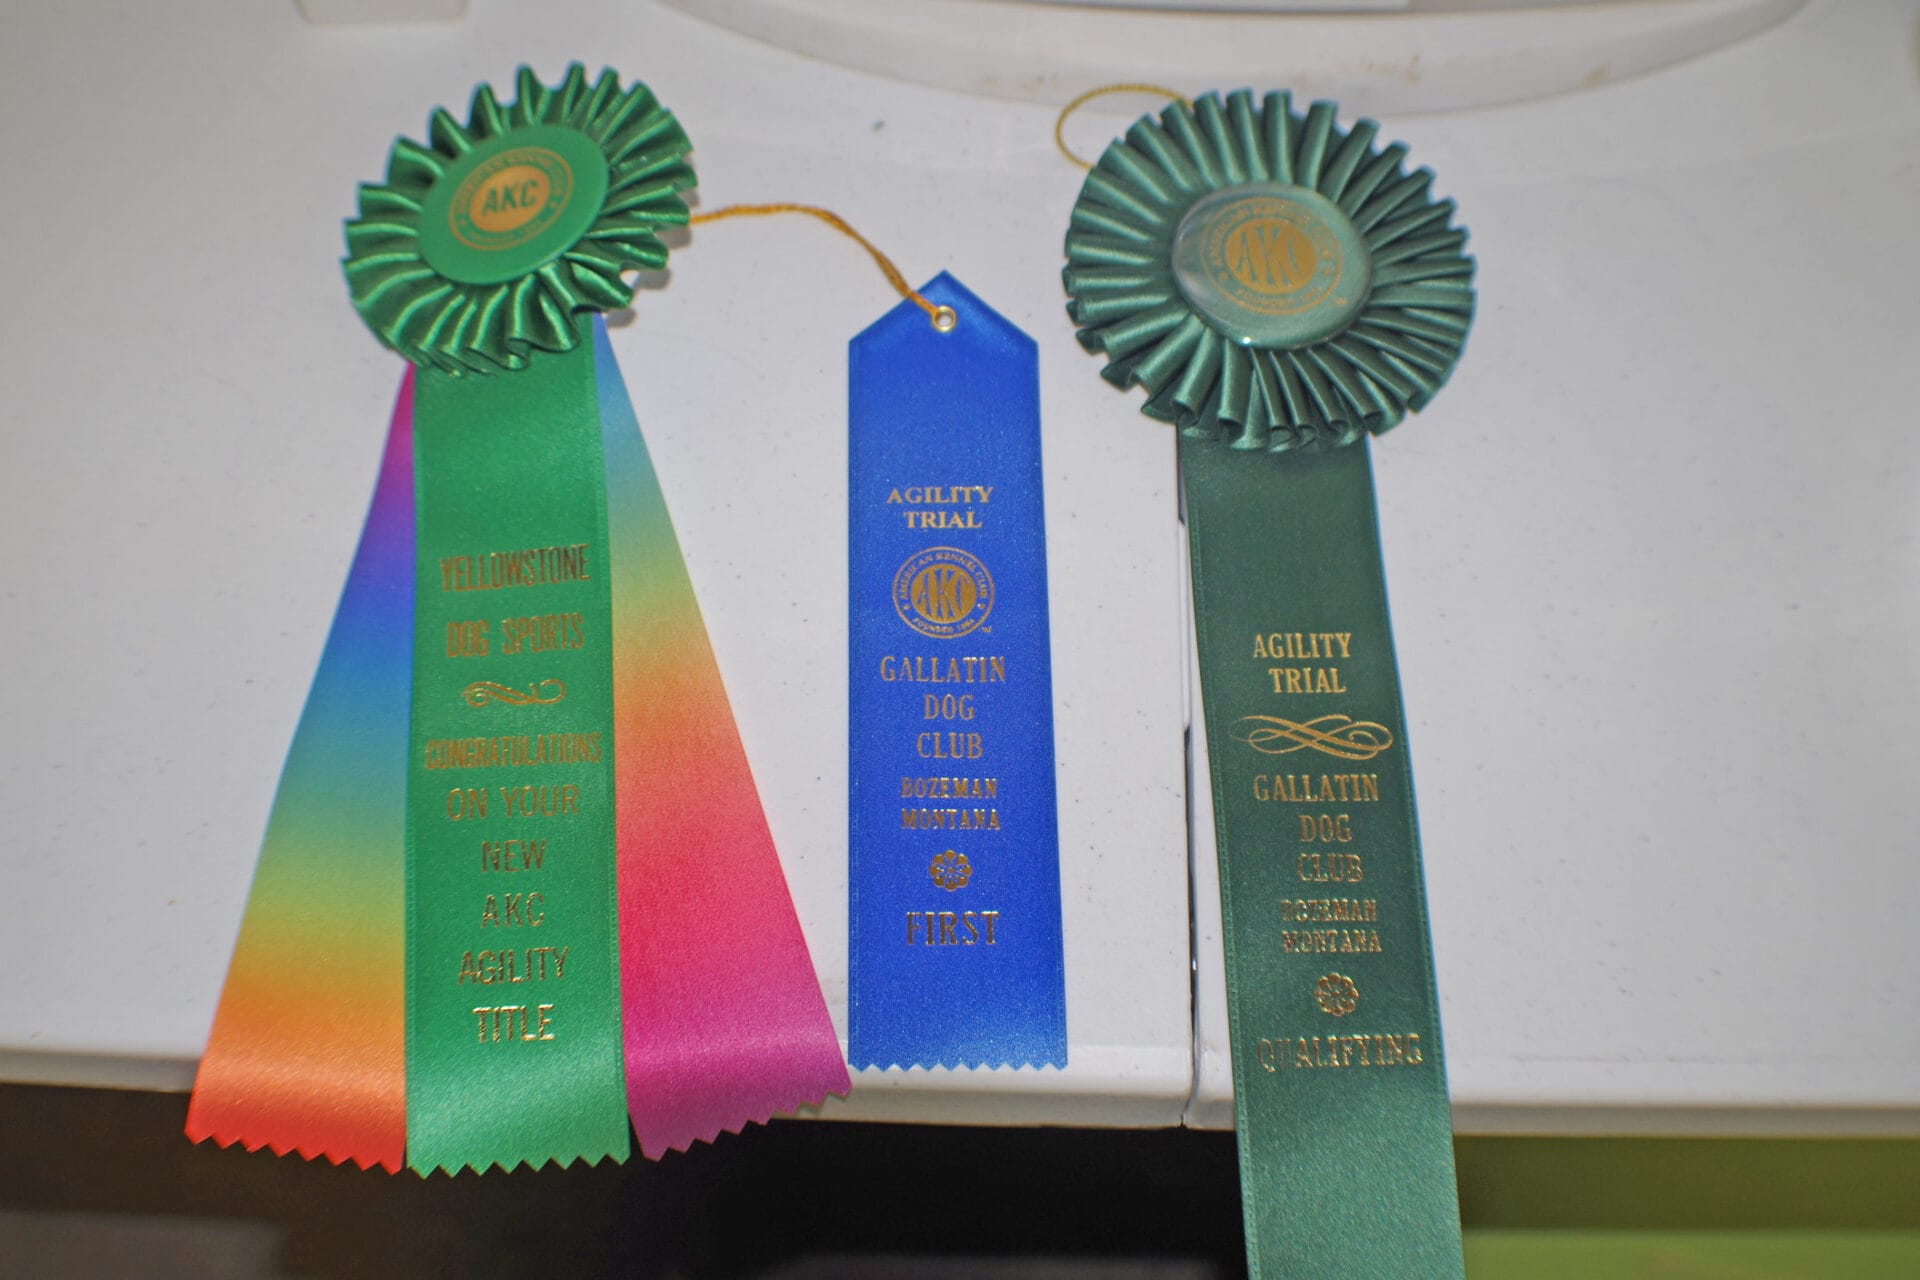 Gallatin Dog Club agility ribbons: new title, first place, and qualifying